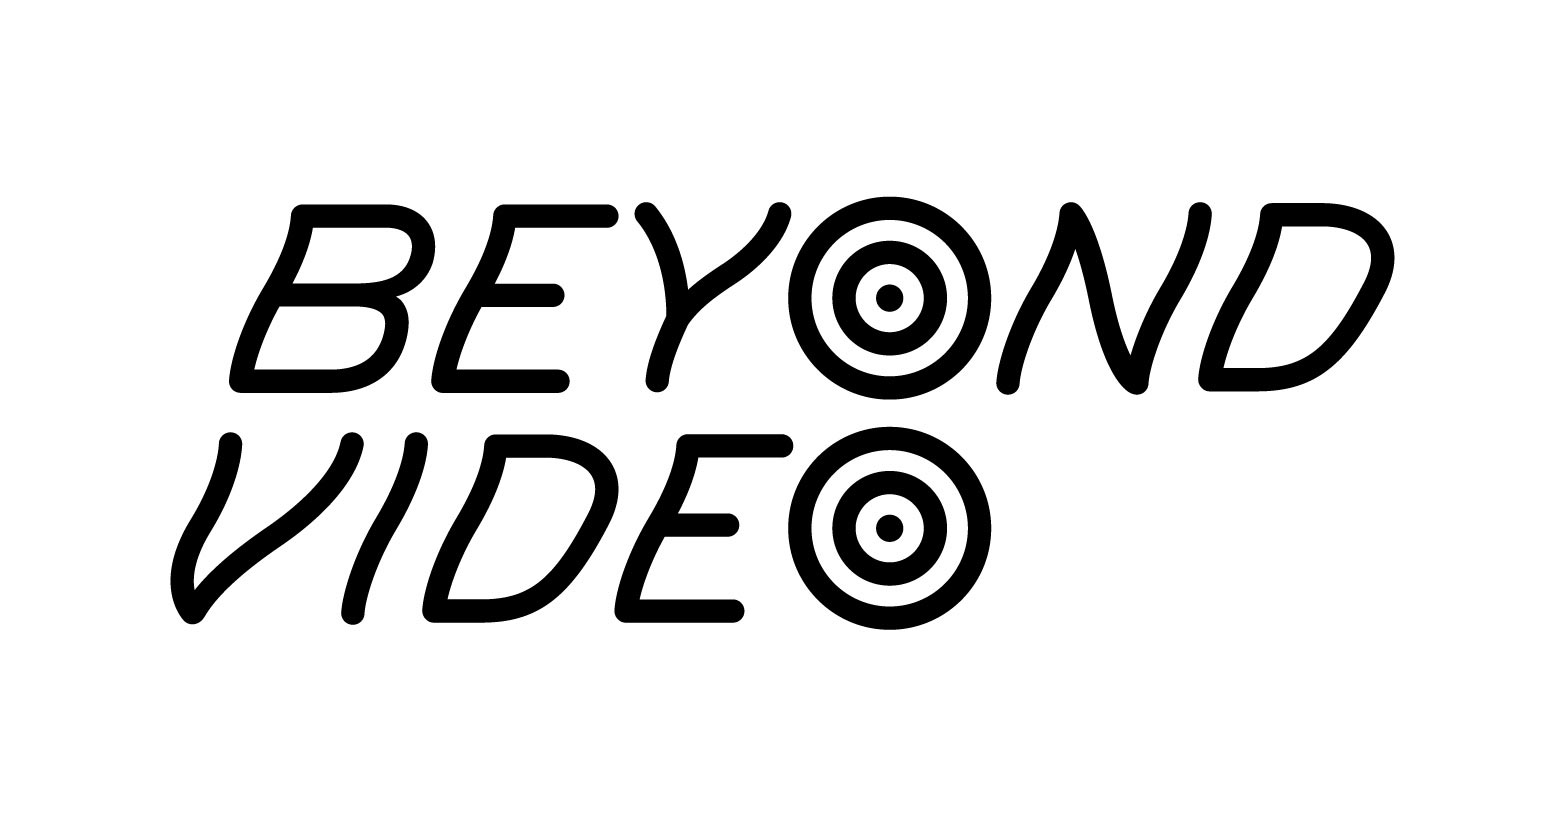 Beyond Video brand identity and logo for contemporary video store and lending library